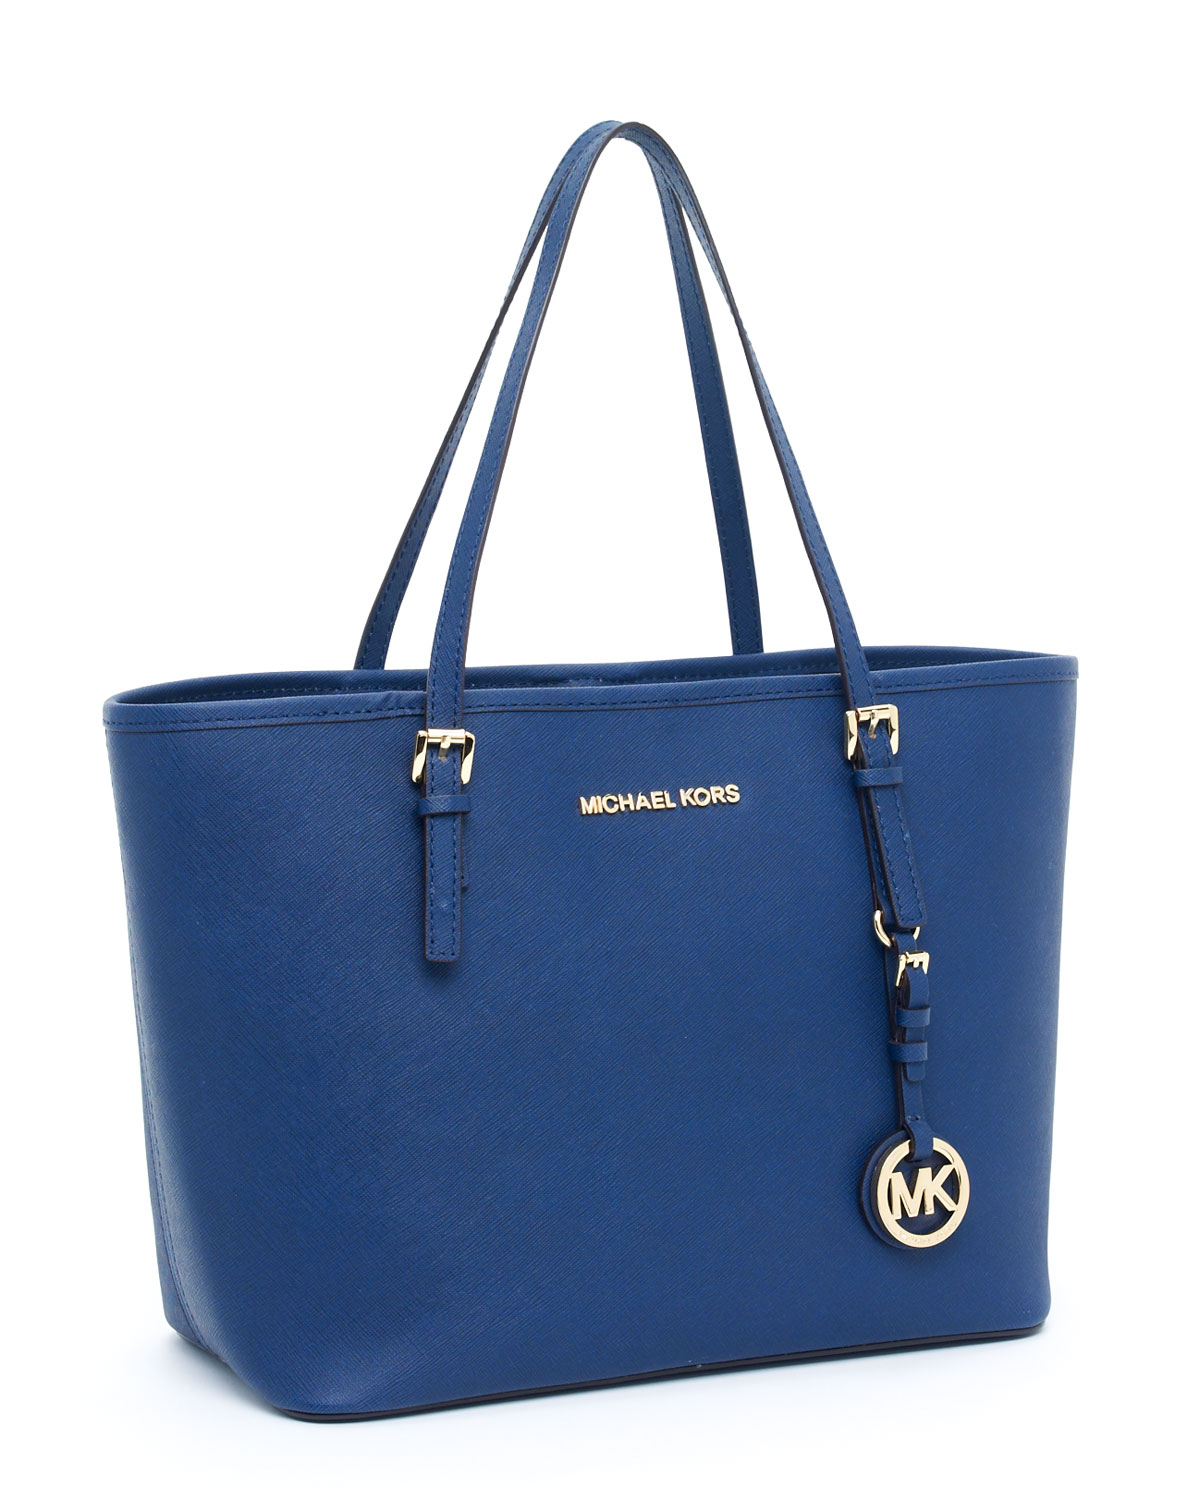 Michael Kors Jet Set Travel Small Travel Tote in Blue - Lyst